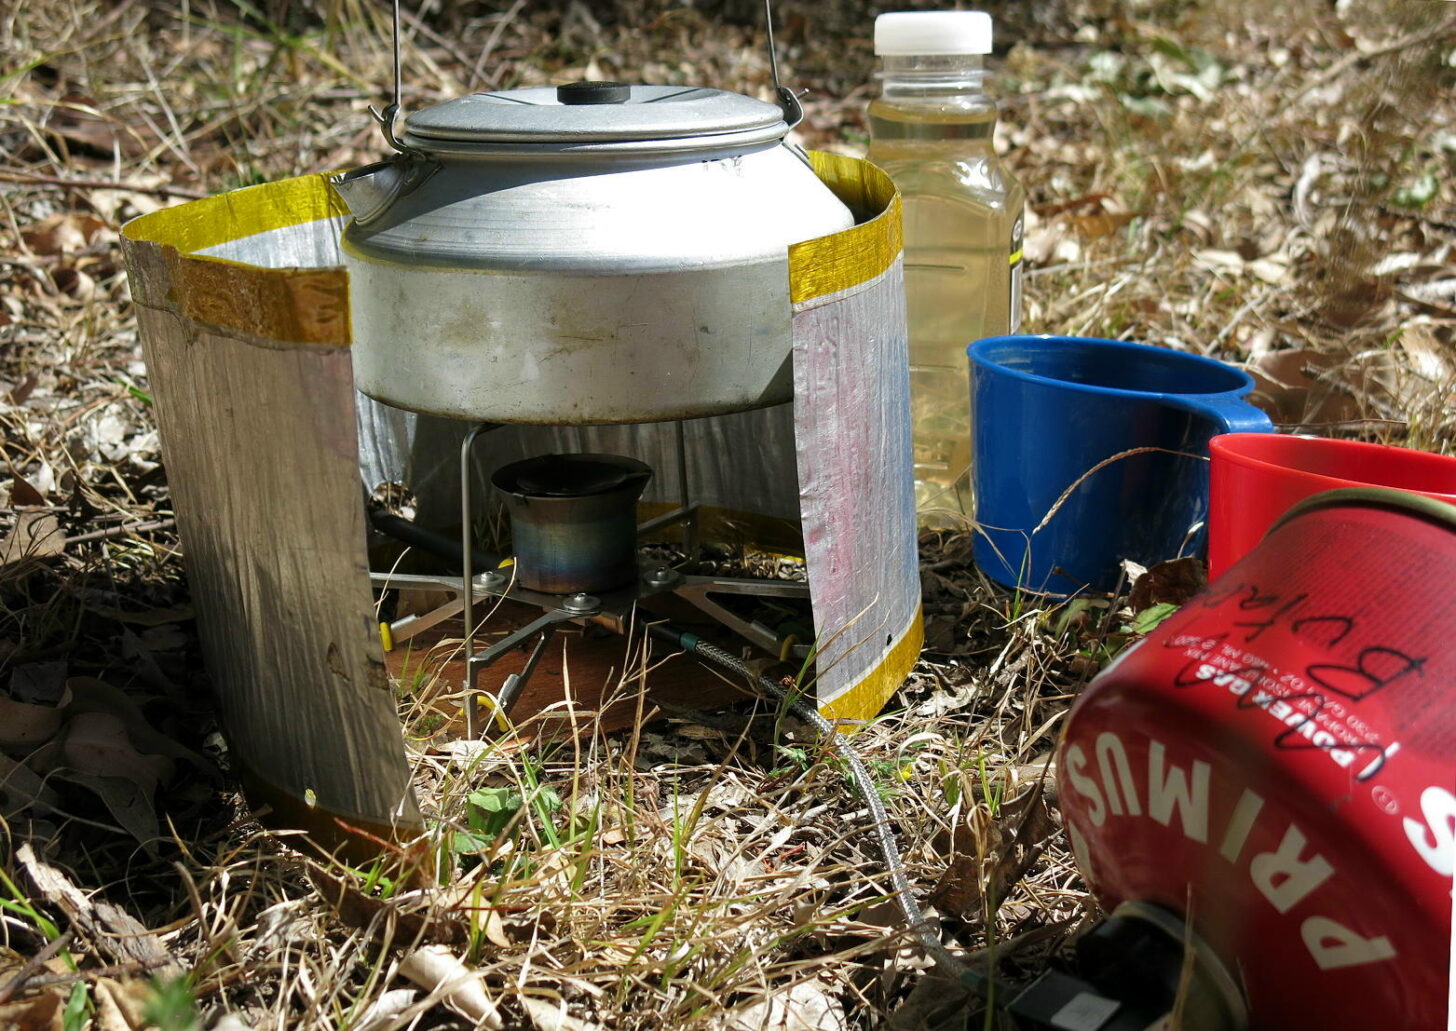 A remote inverted canister stove heats water in a pot.